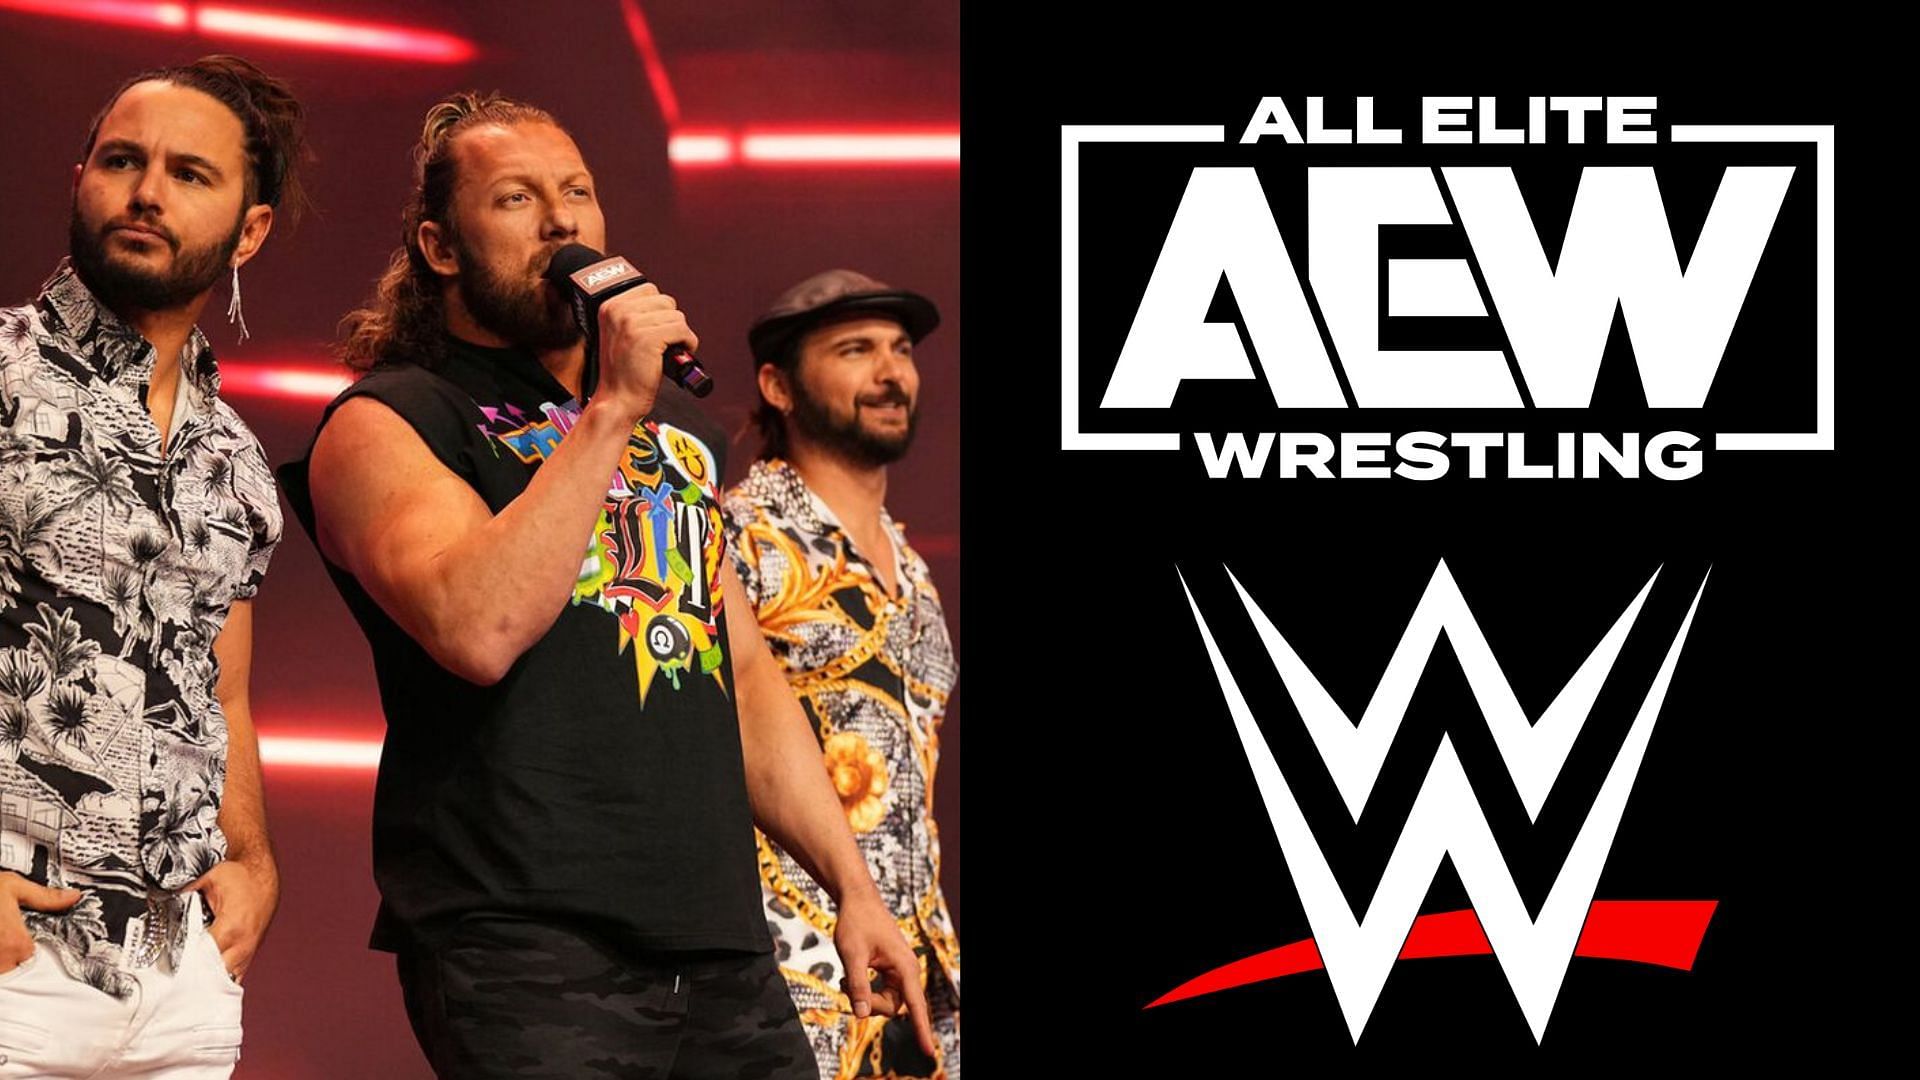 Does this report prove the rumored rift in the AEW roster?